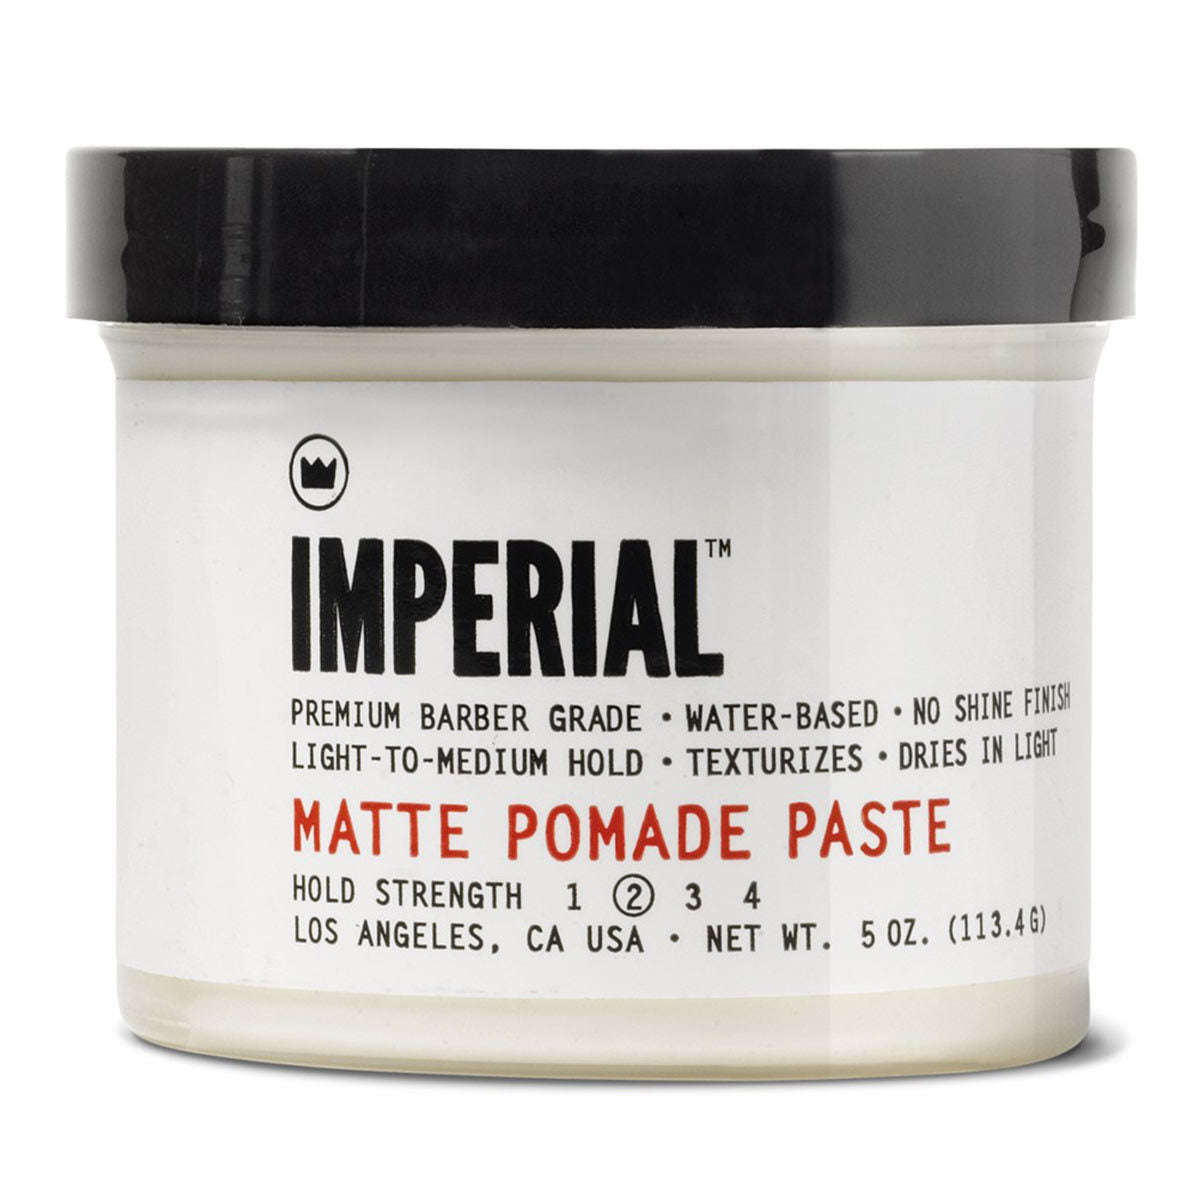 Primary image of Matte Pomade Paste